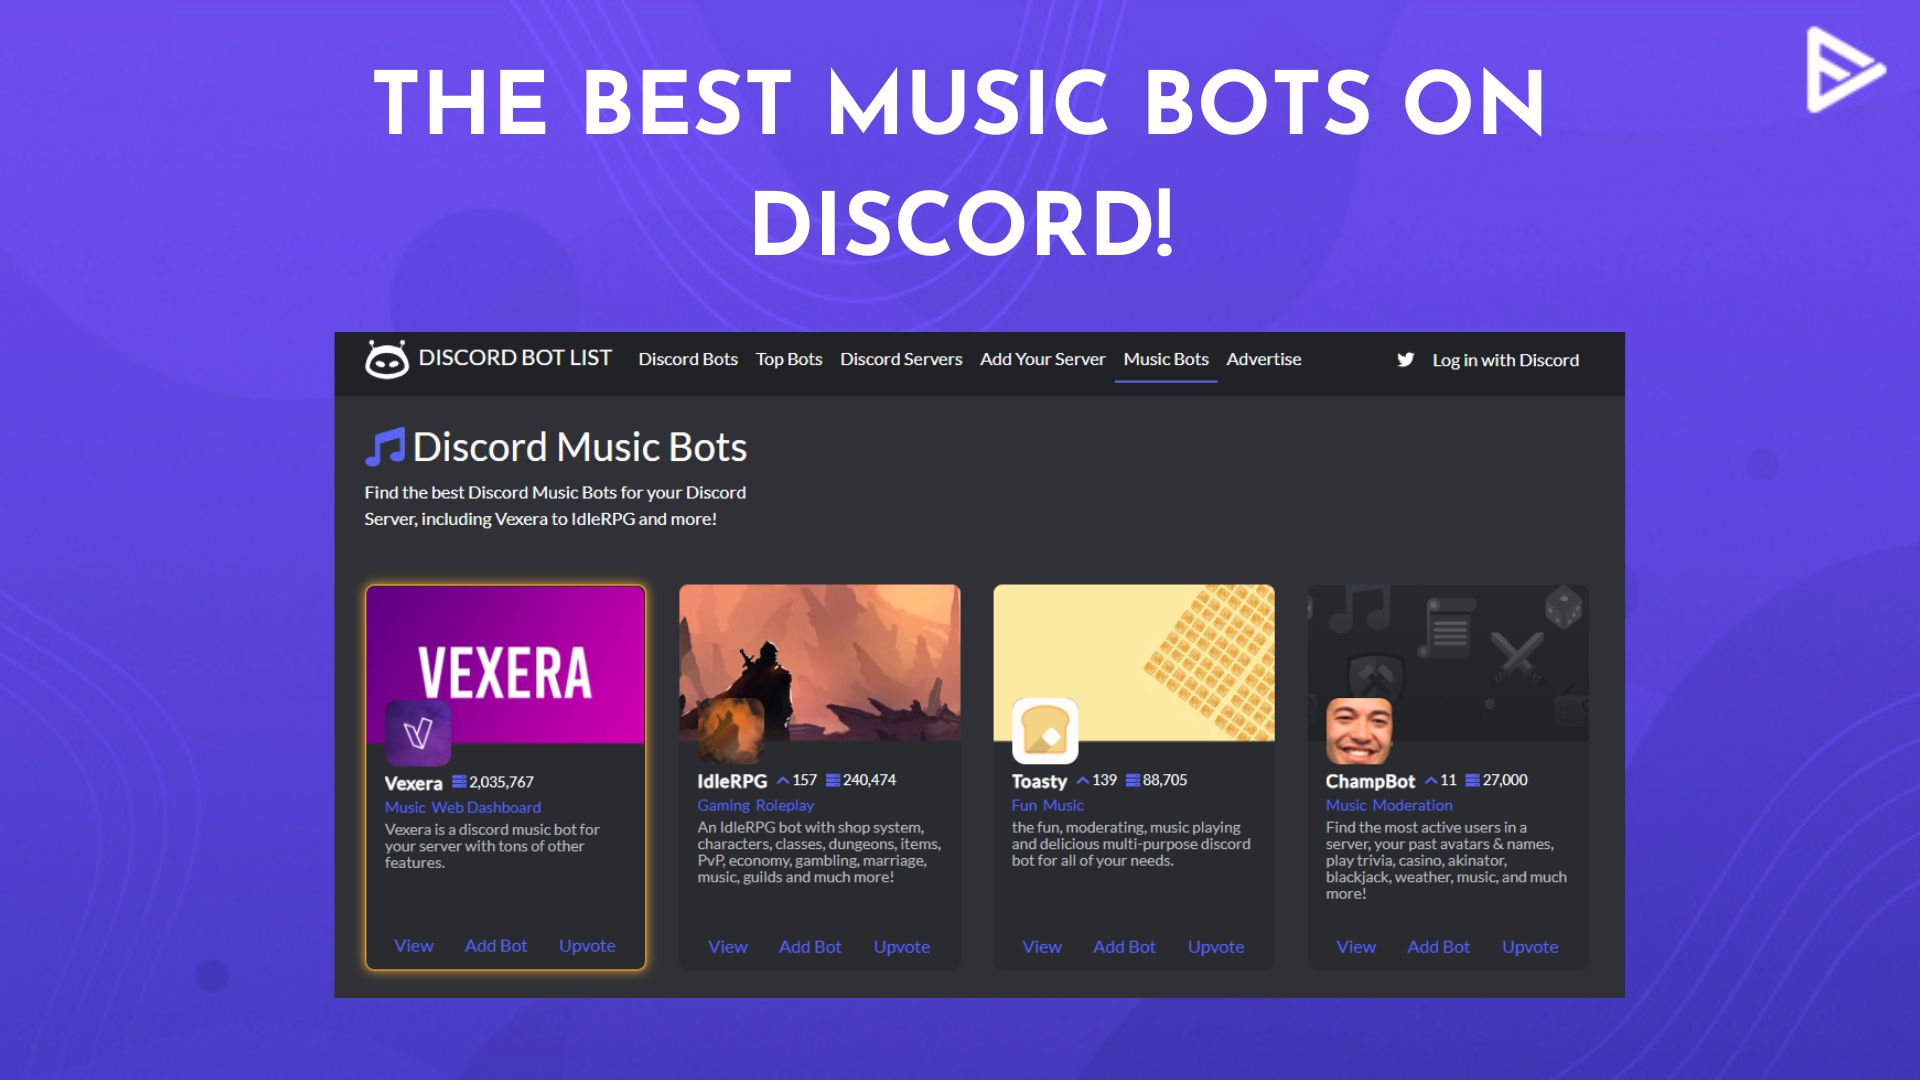 The Best Music Bots On Discord!